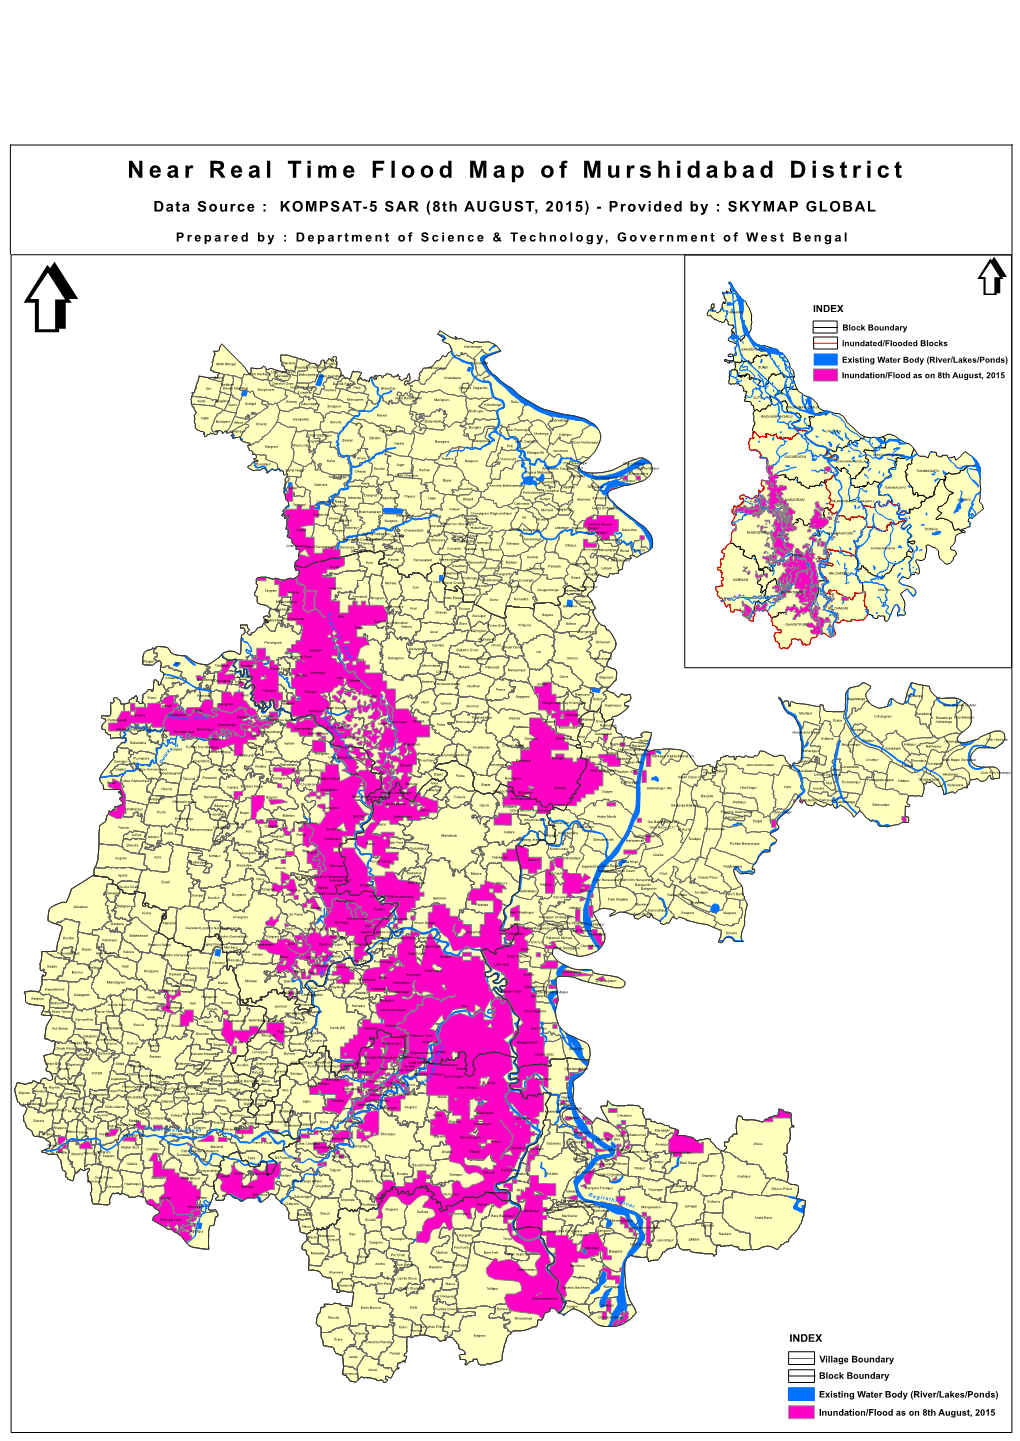 Near Real Time Flood Map of Murshidabad District